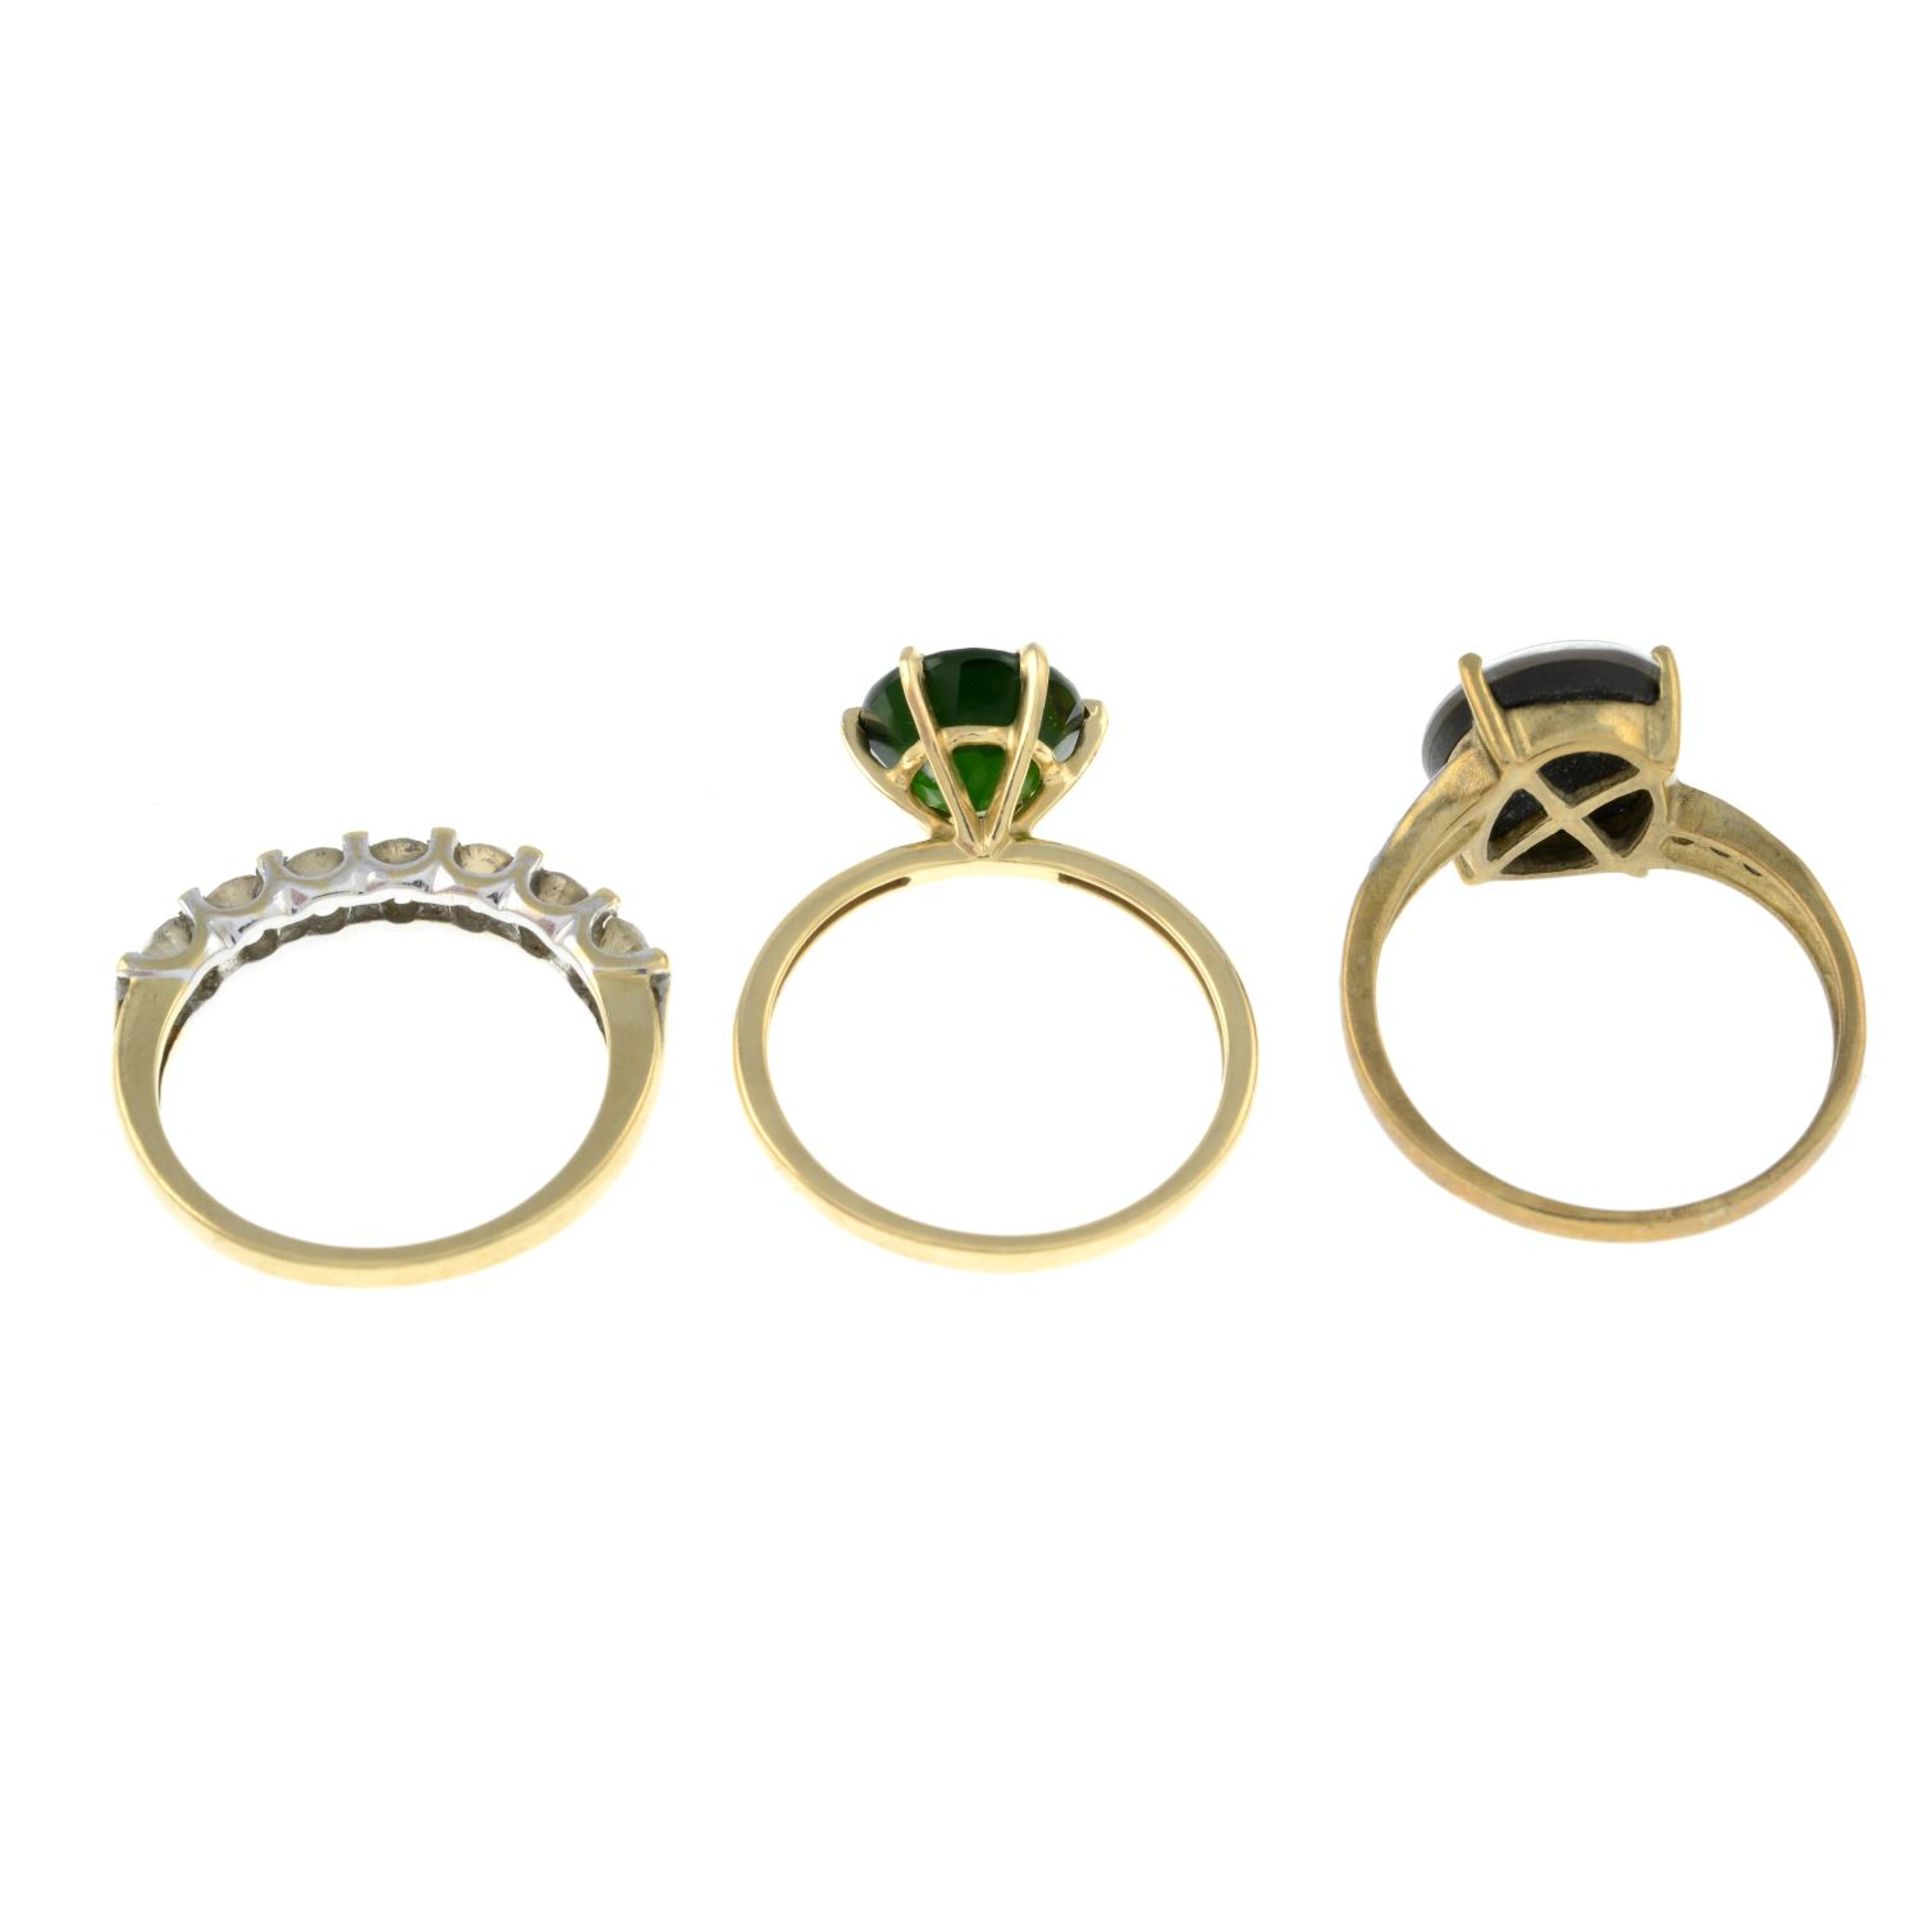 14ct gold green diopside single-stone ring, hallmarks for 14ct gold, ring size N1/2, 2.2gms. - Image 3 of 3